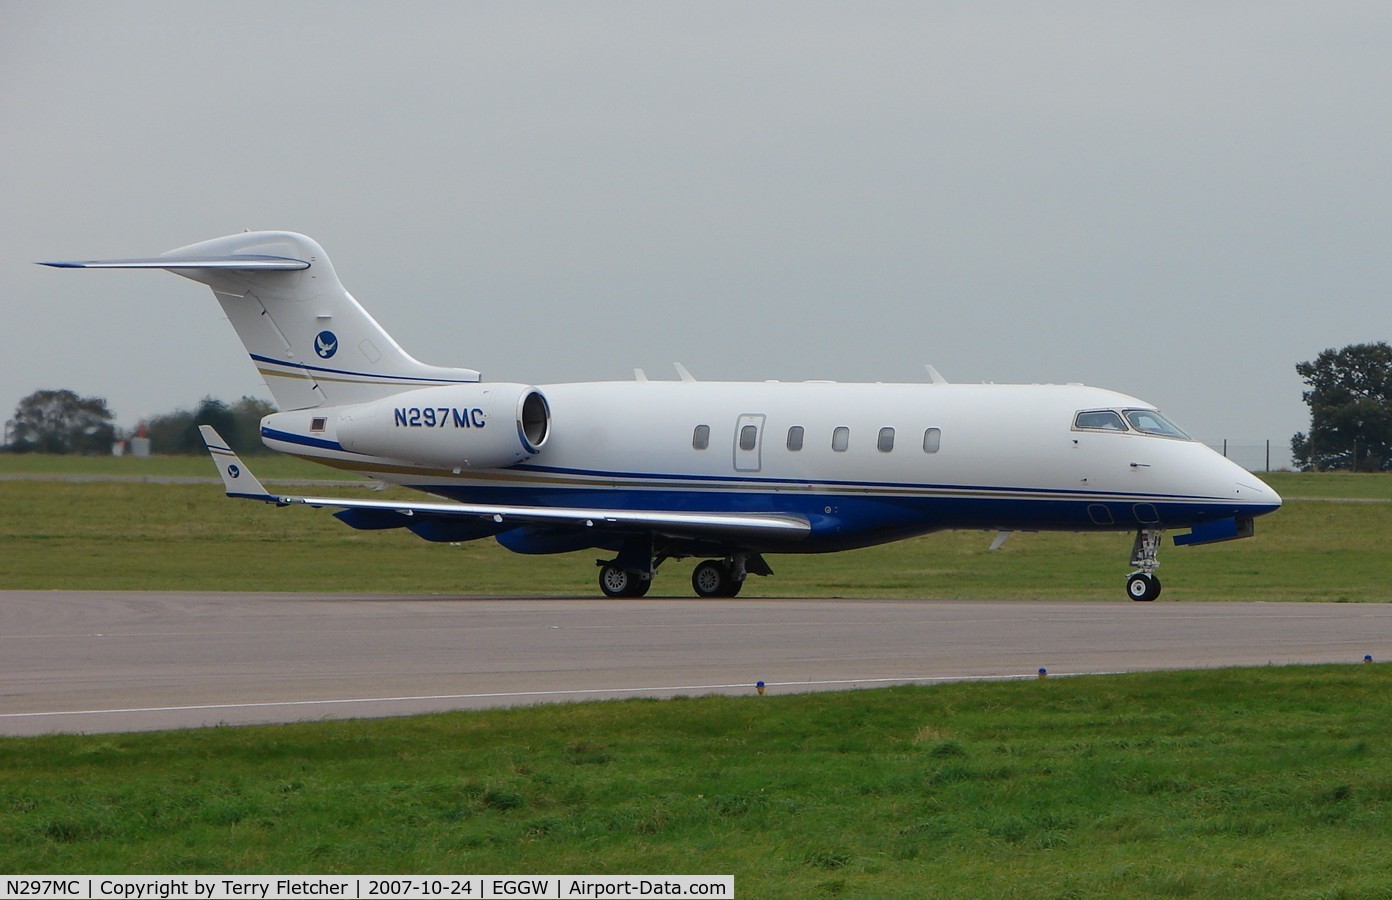 N297MC, 2006 Bombardier Challenger 300 (BD-100-1A10) C/N 20127, on a busy day at Luton Airport (UK)